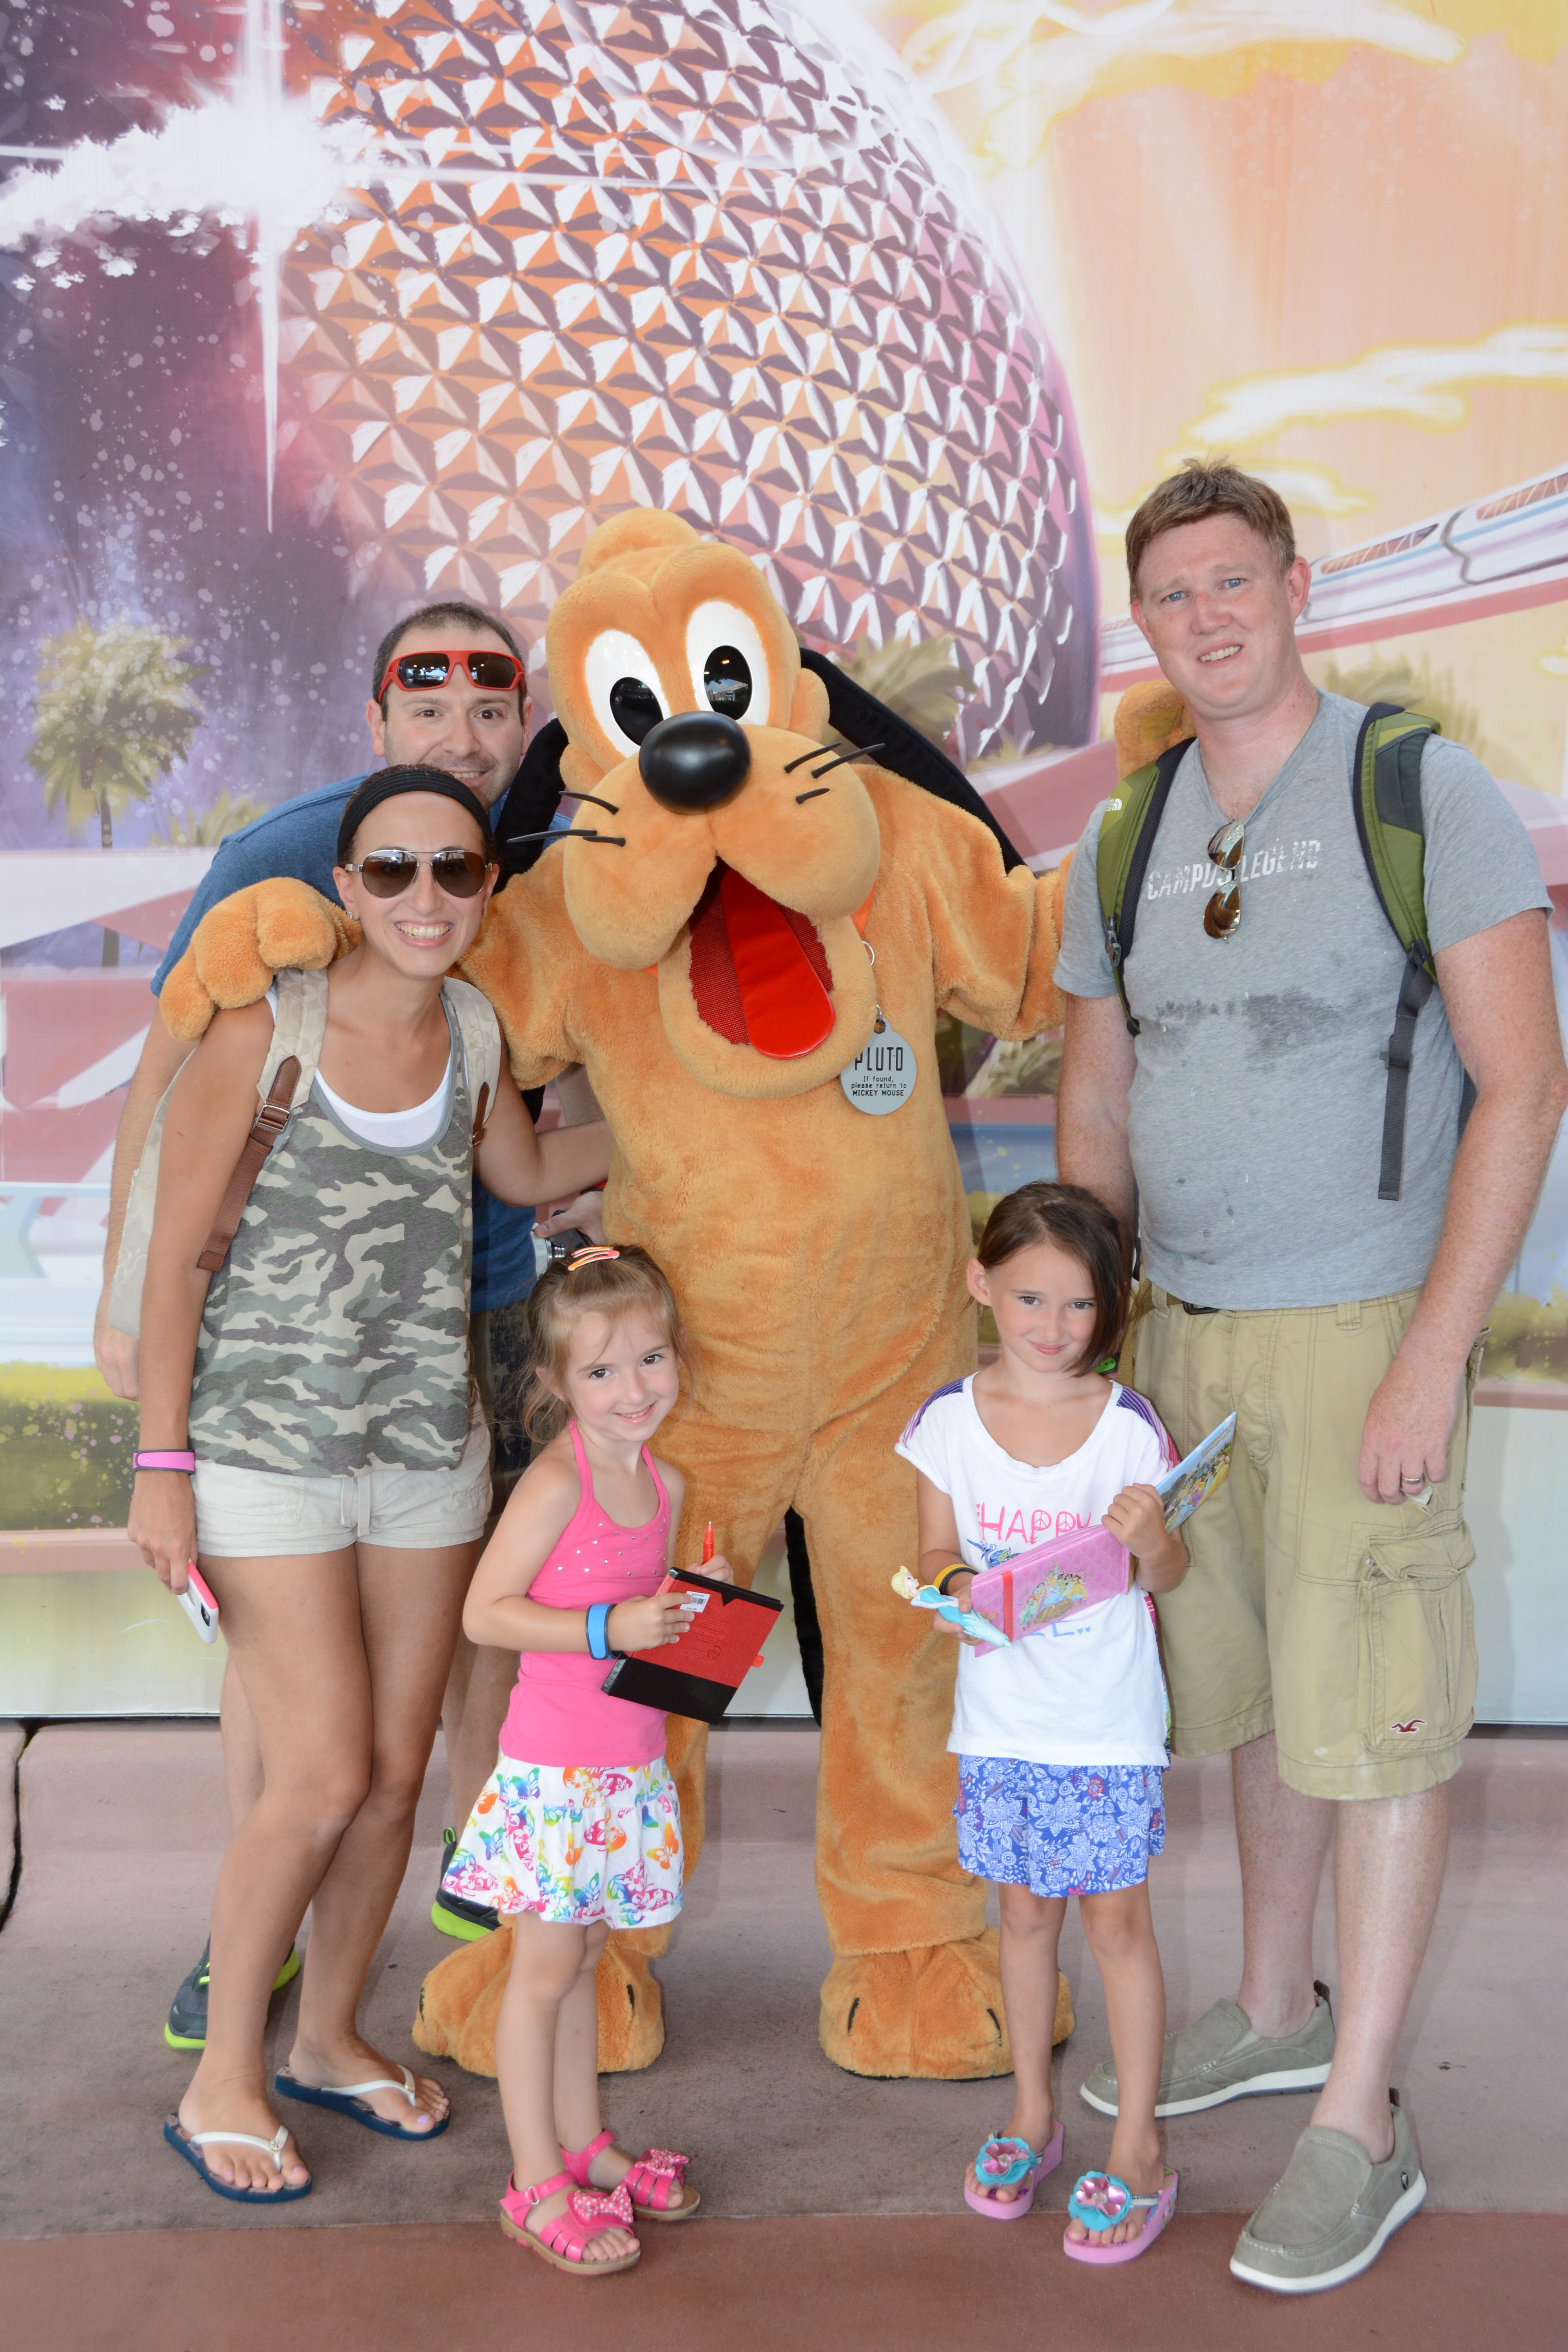 Meeting Pluto at Disney's Epcot with Backpacks On